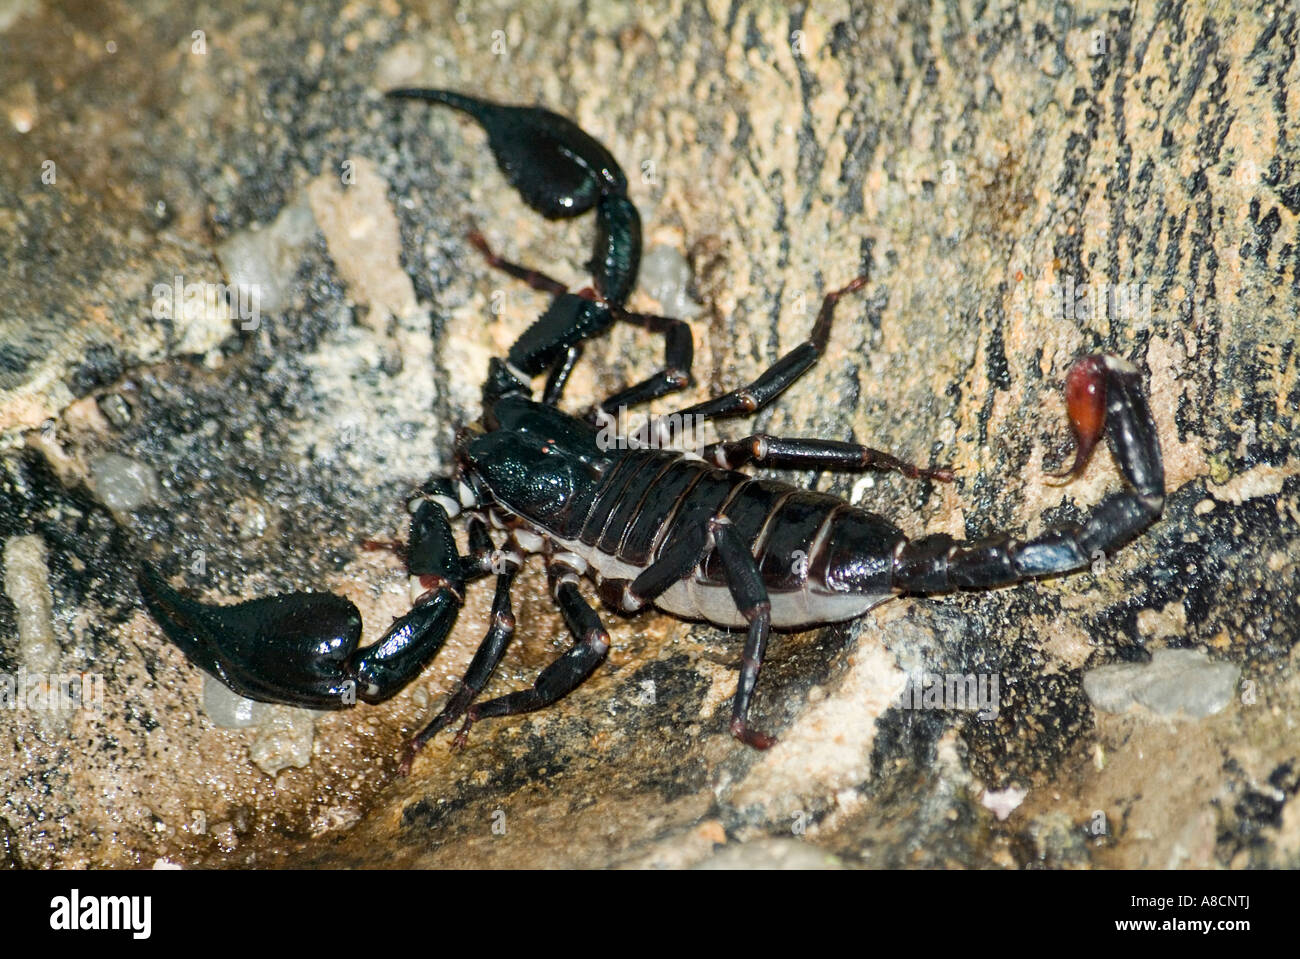 The Malaysian Forest Scorpion also known as the Giant Blue Scorpion Heterometrus spinifer Stock Photo